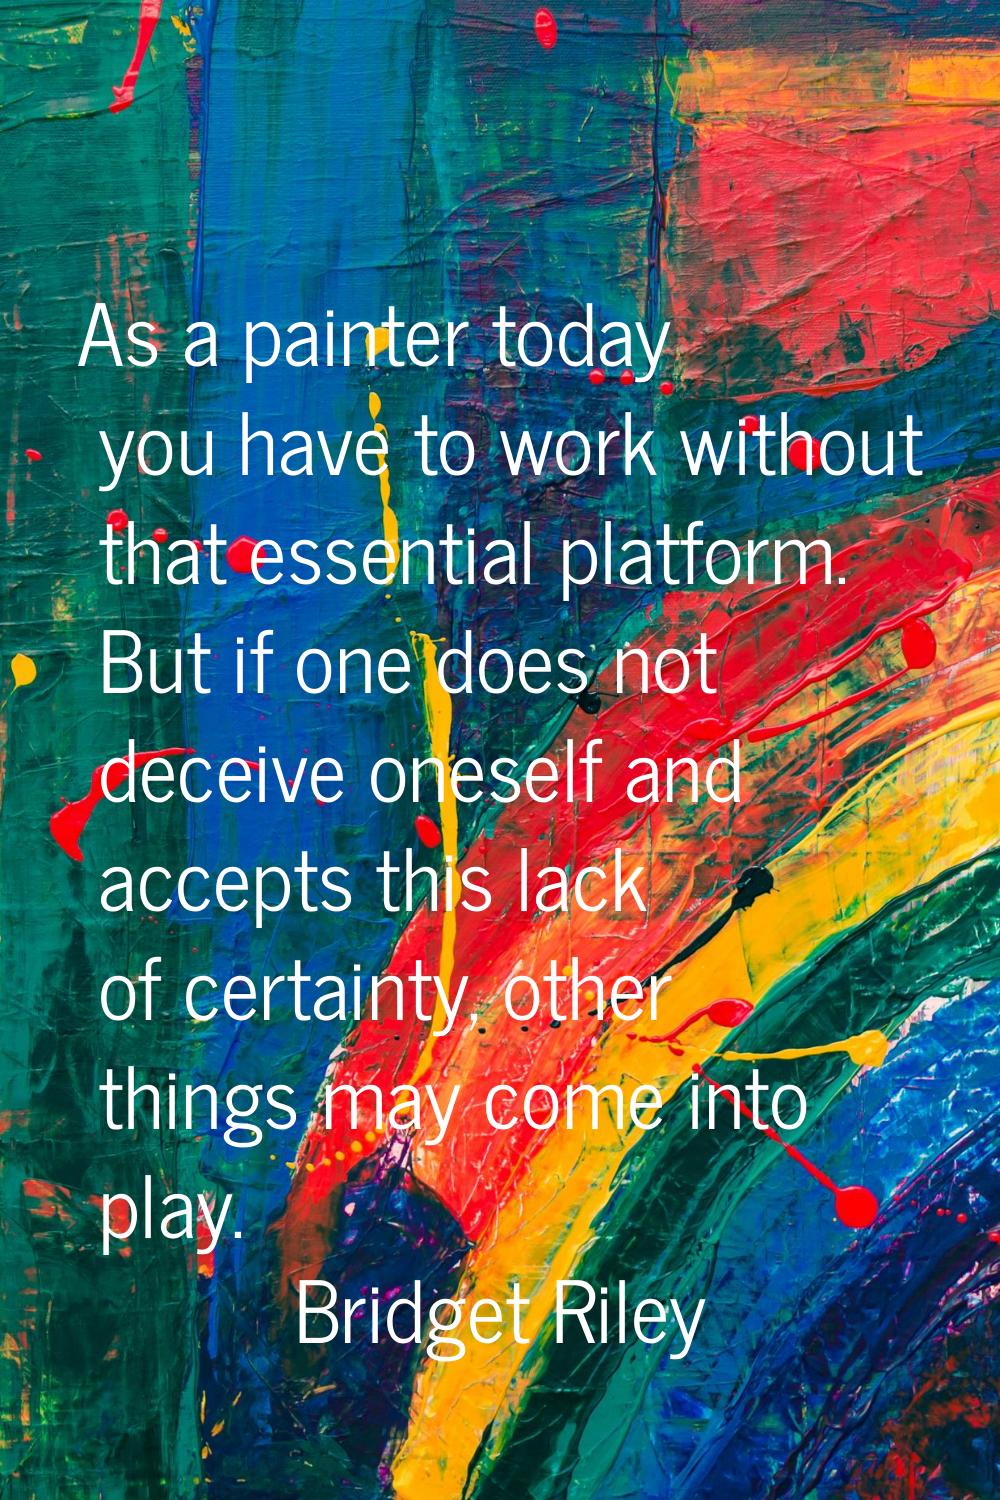 As a painter today you have to work without that essential platform. But if one does not deceive on